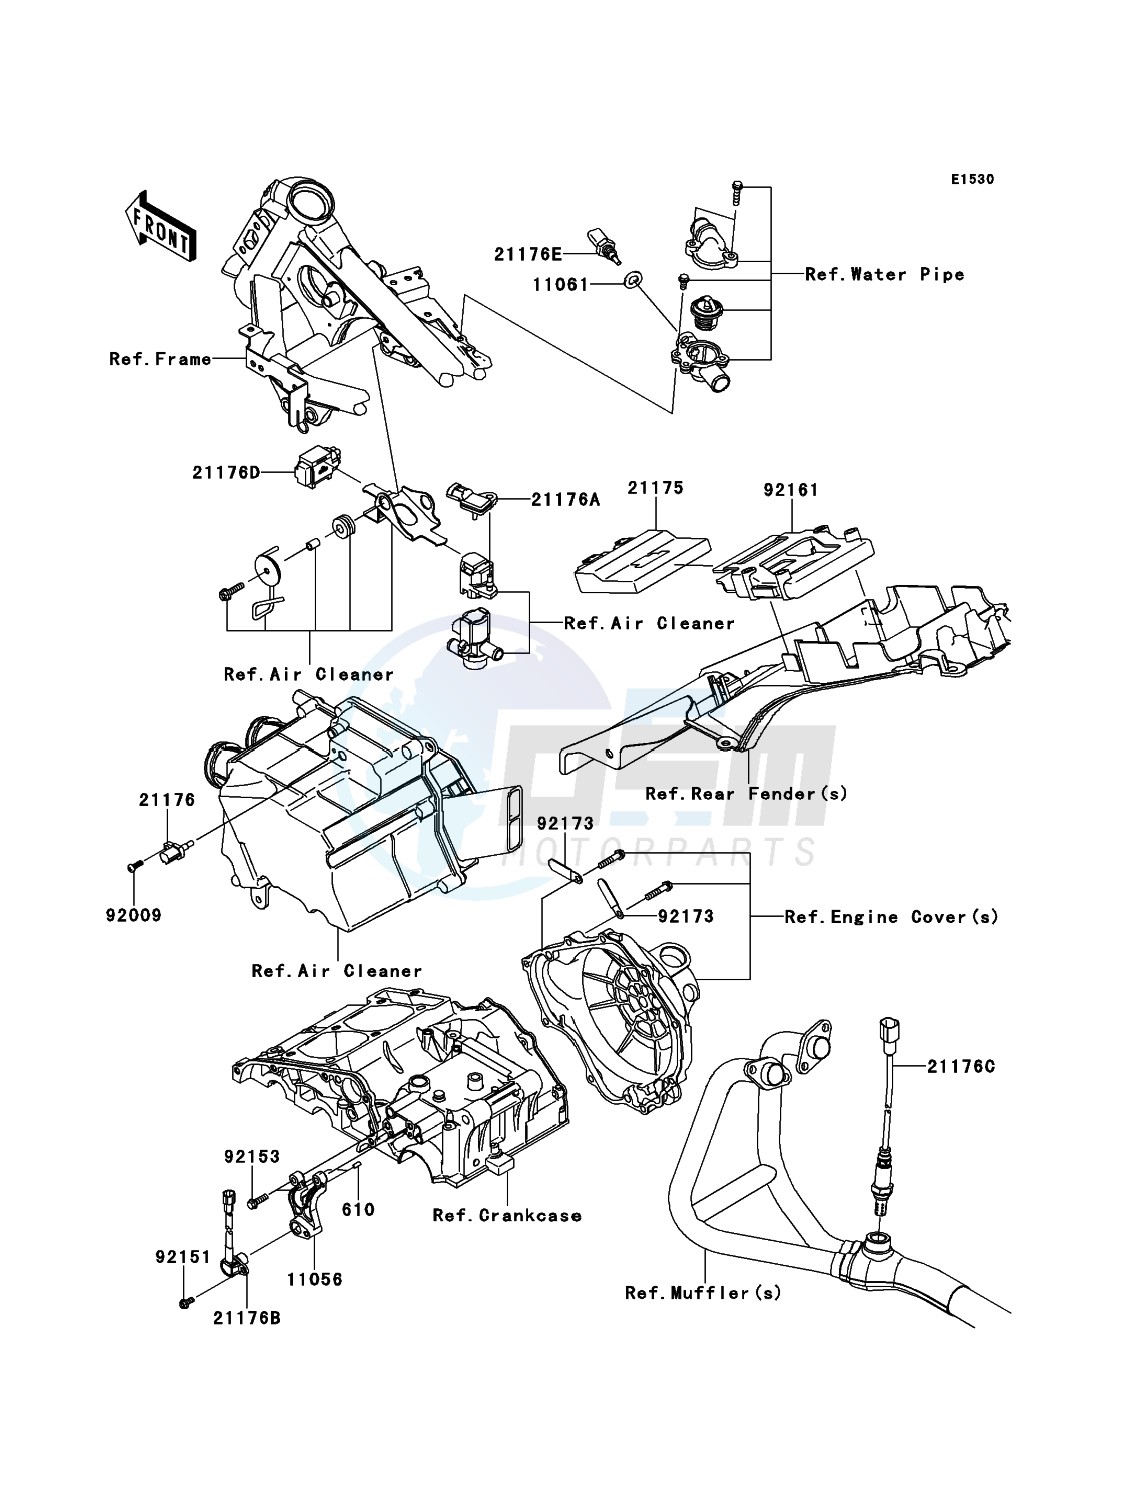 Fuel Injection image